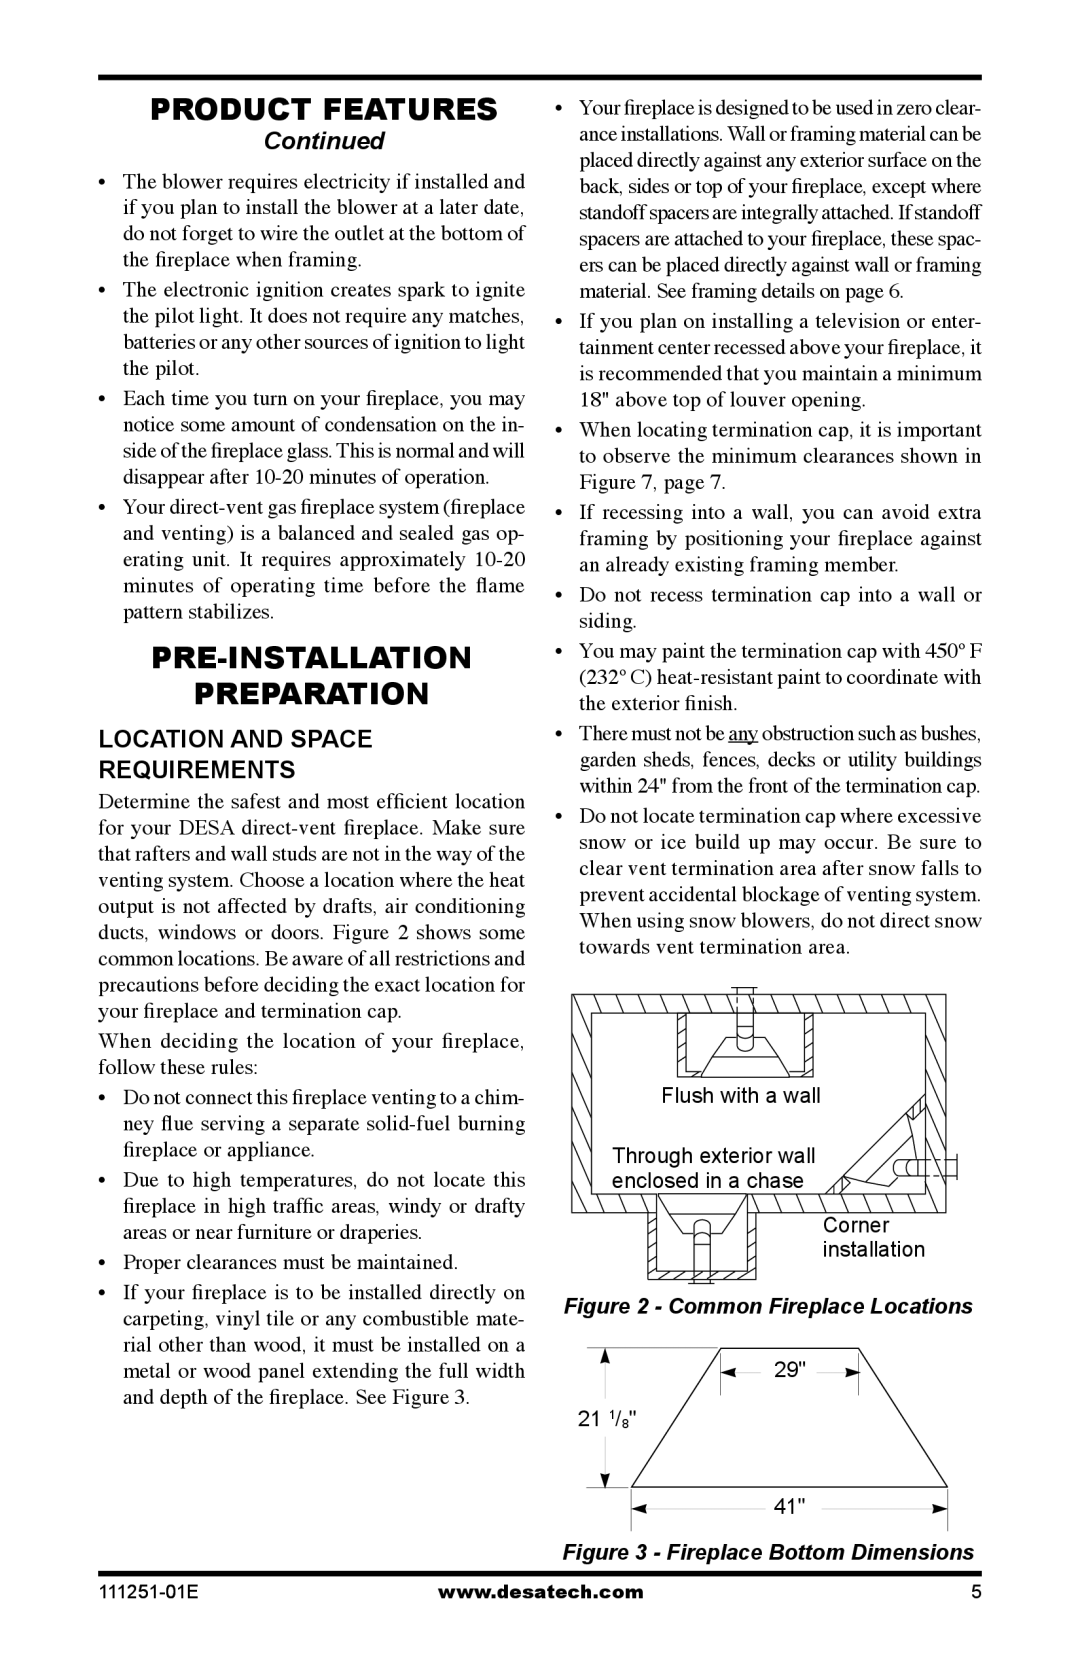 Desa (V)T36EPA Product Features, Pre-Installation Preparation, Continued, Location and space requirements 